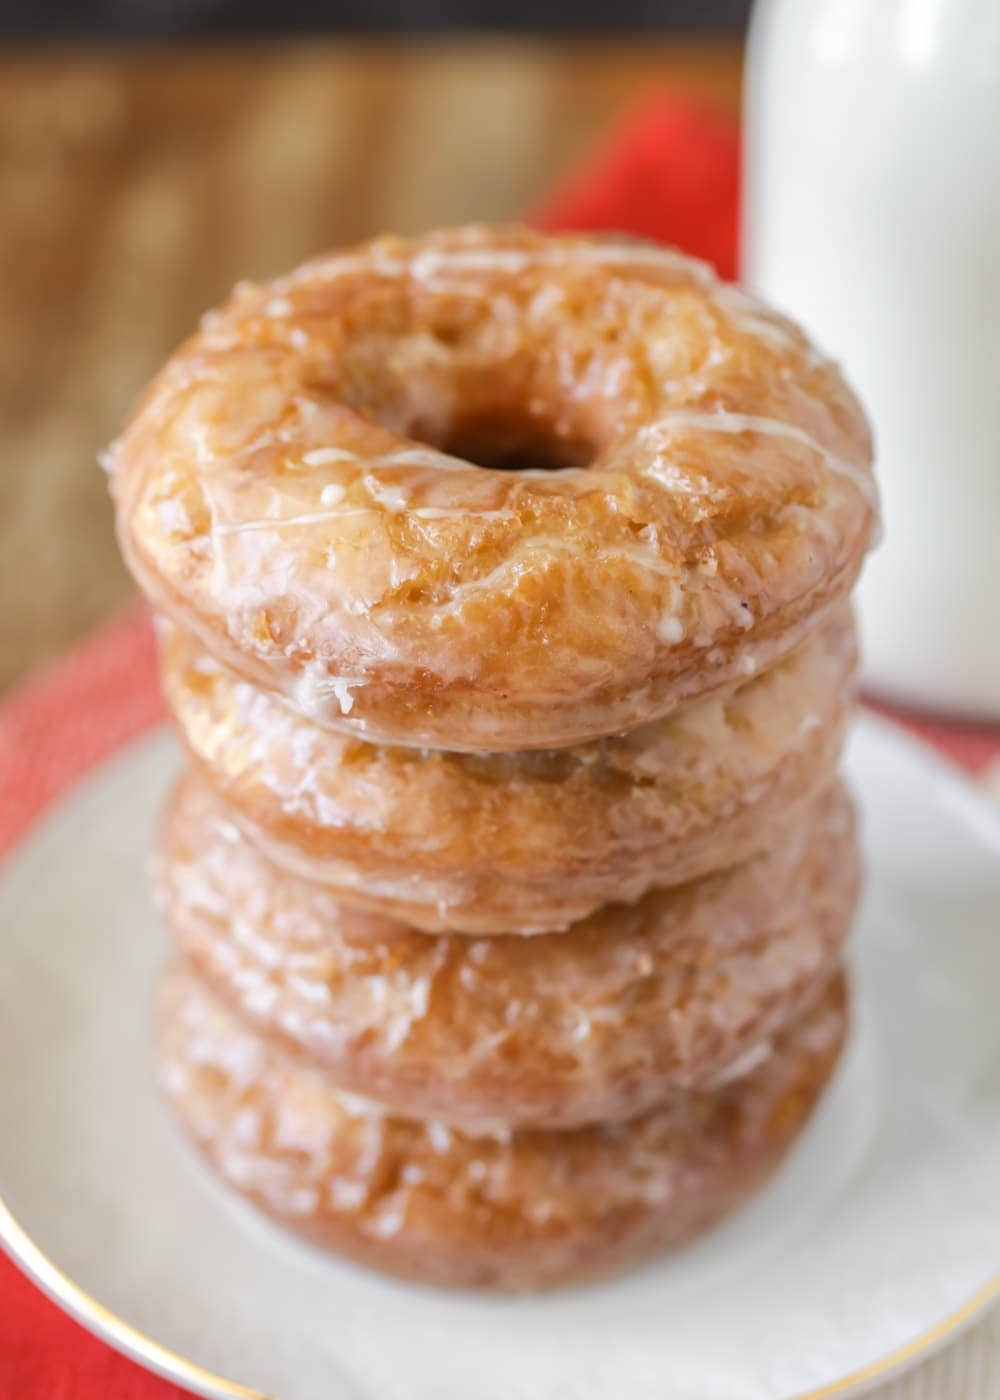 A stack of old fashioned buttermilk donuts on a white plate